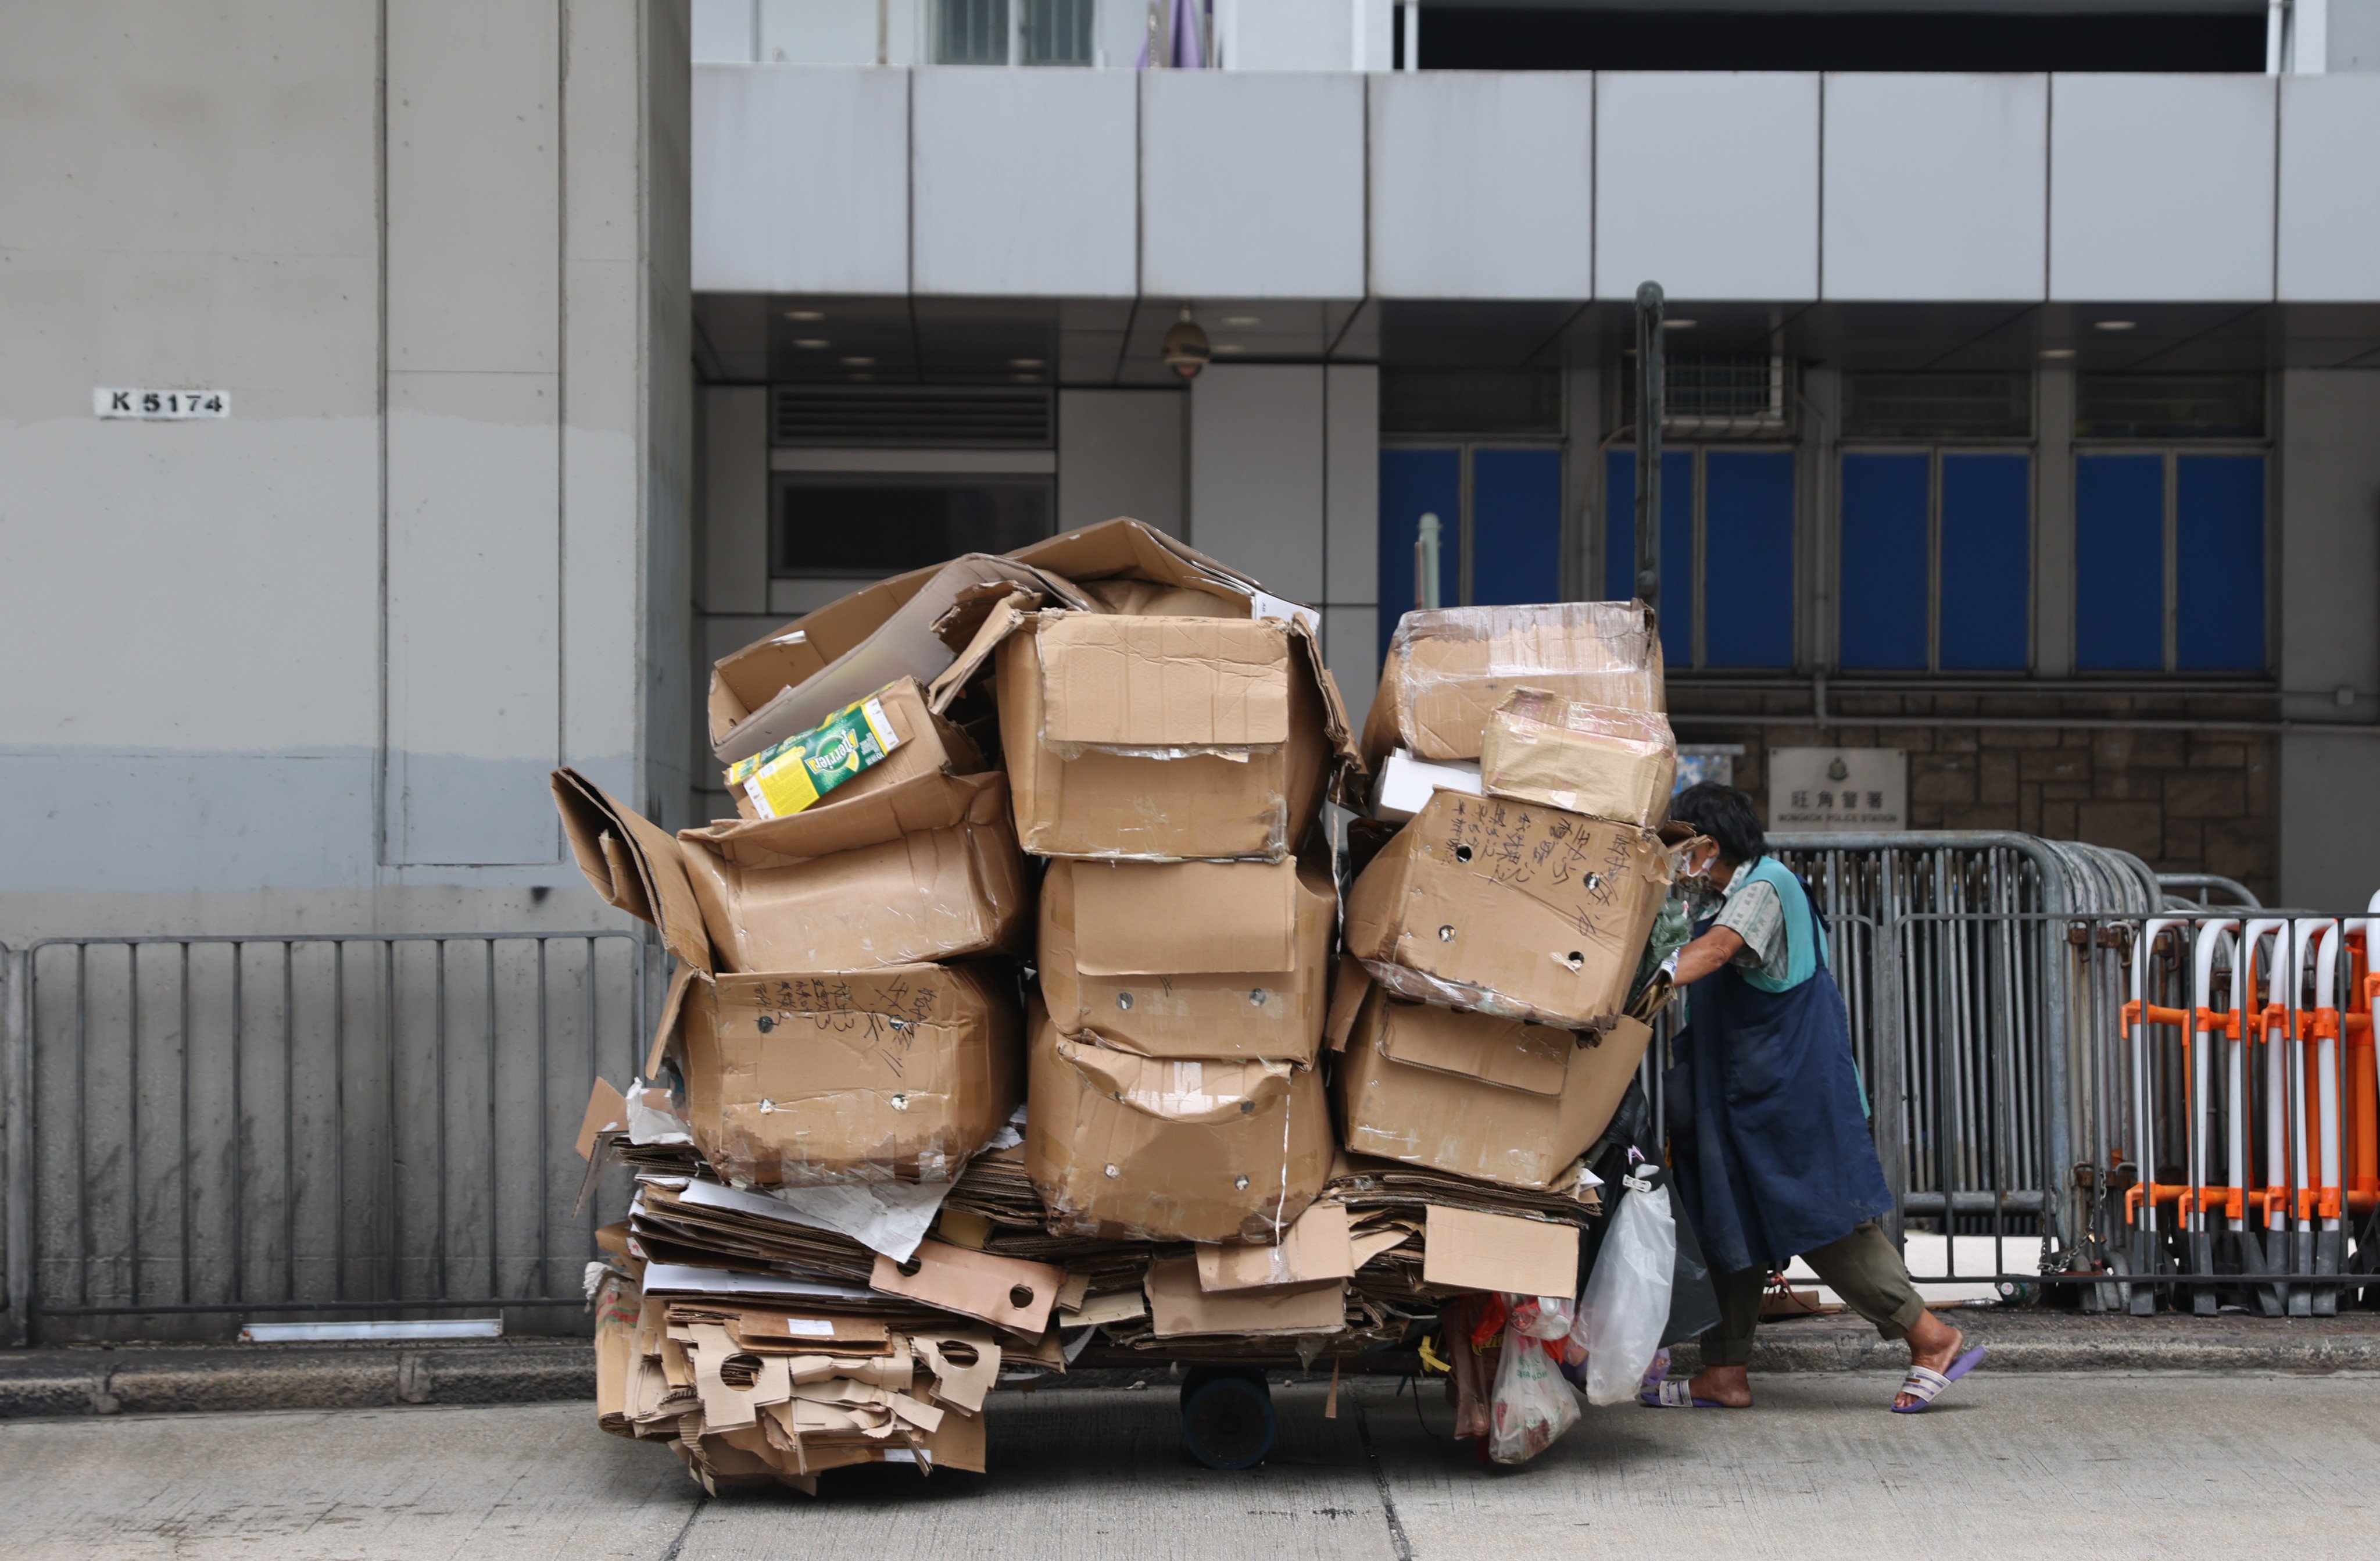 An elderly person pushes a trolley of used boxes in Mong Kok on June 19. Addressing the city’s growing wealth inequality is an urgent task for the new administration. Photo: Nora Tam